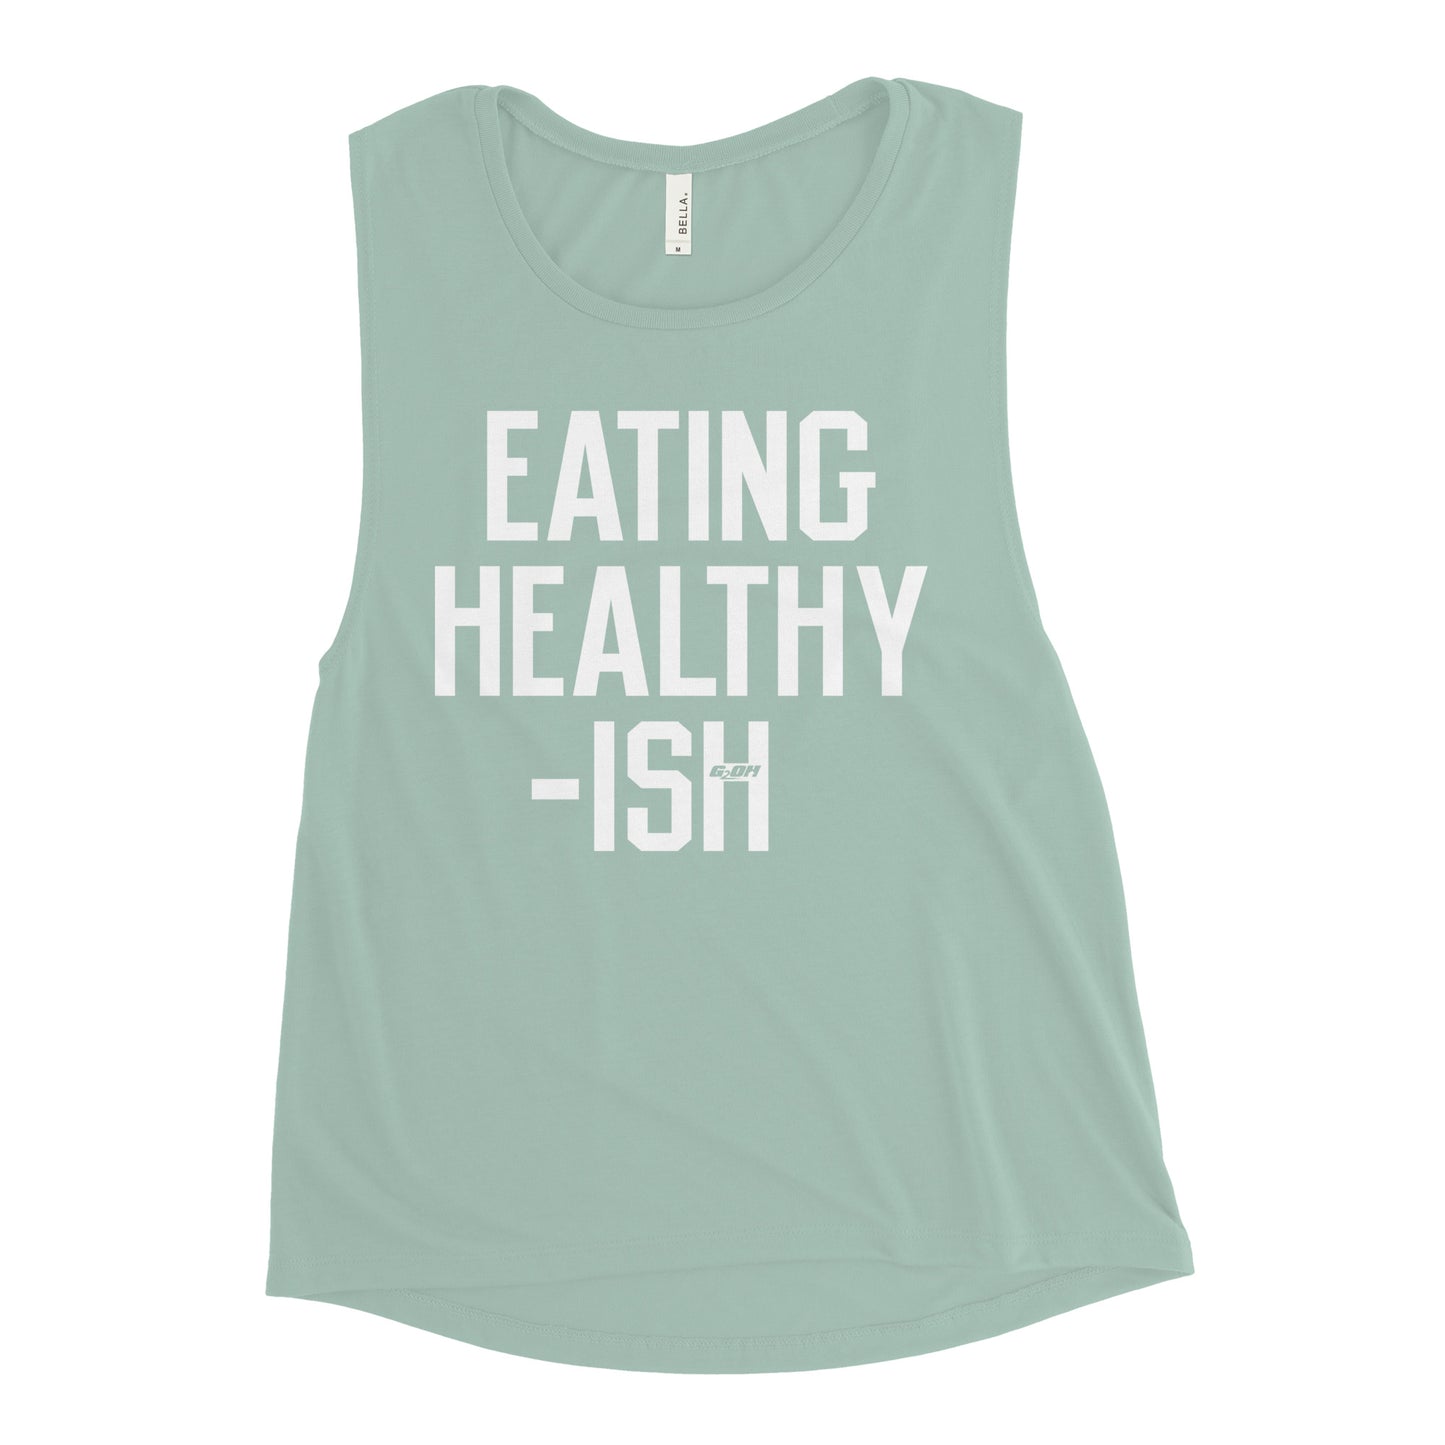 Eating Healthy-ish Women's Muscle Tank